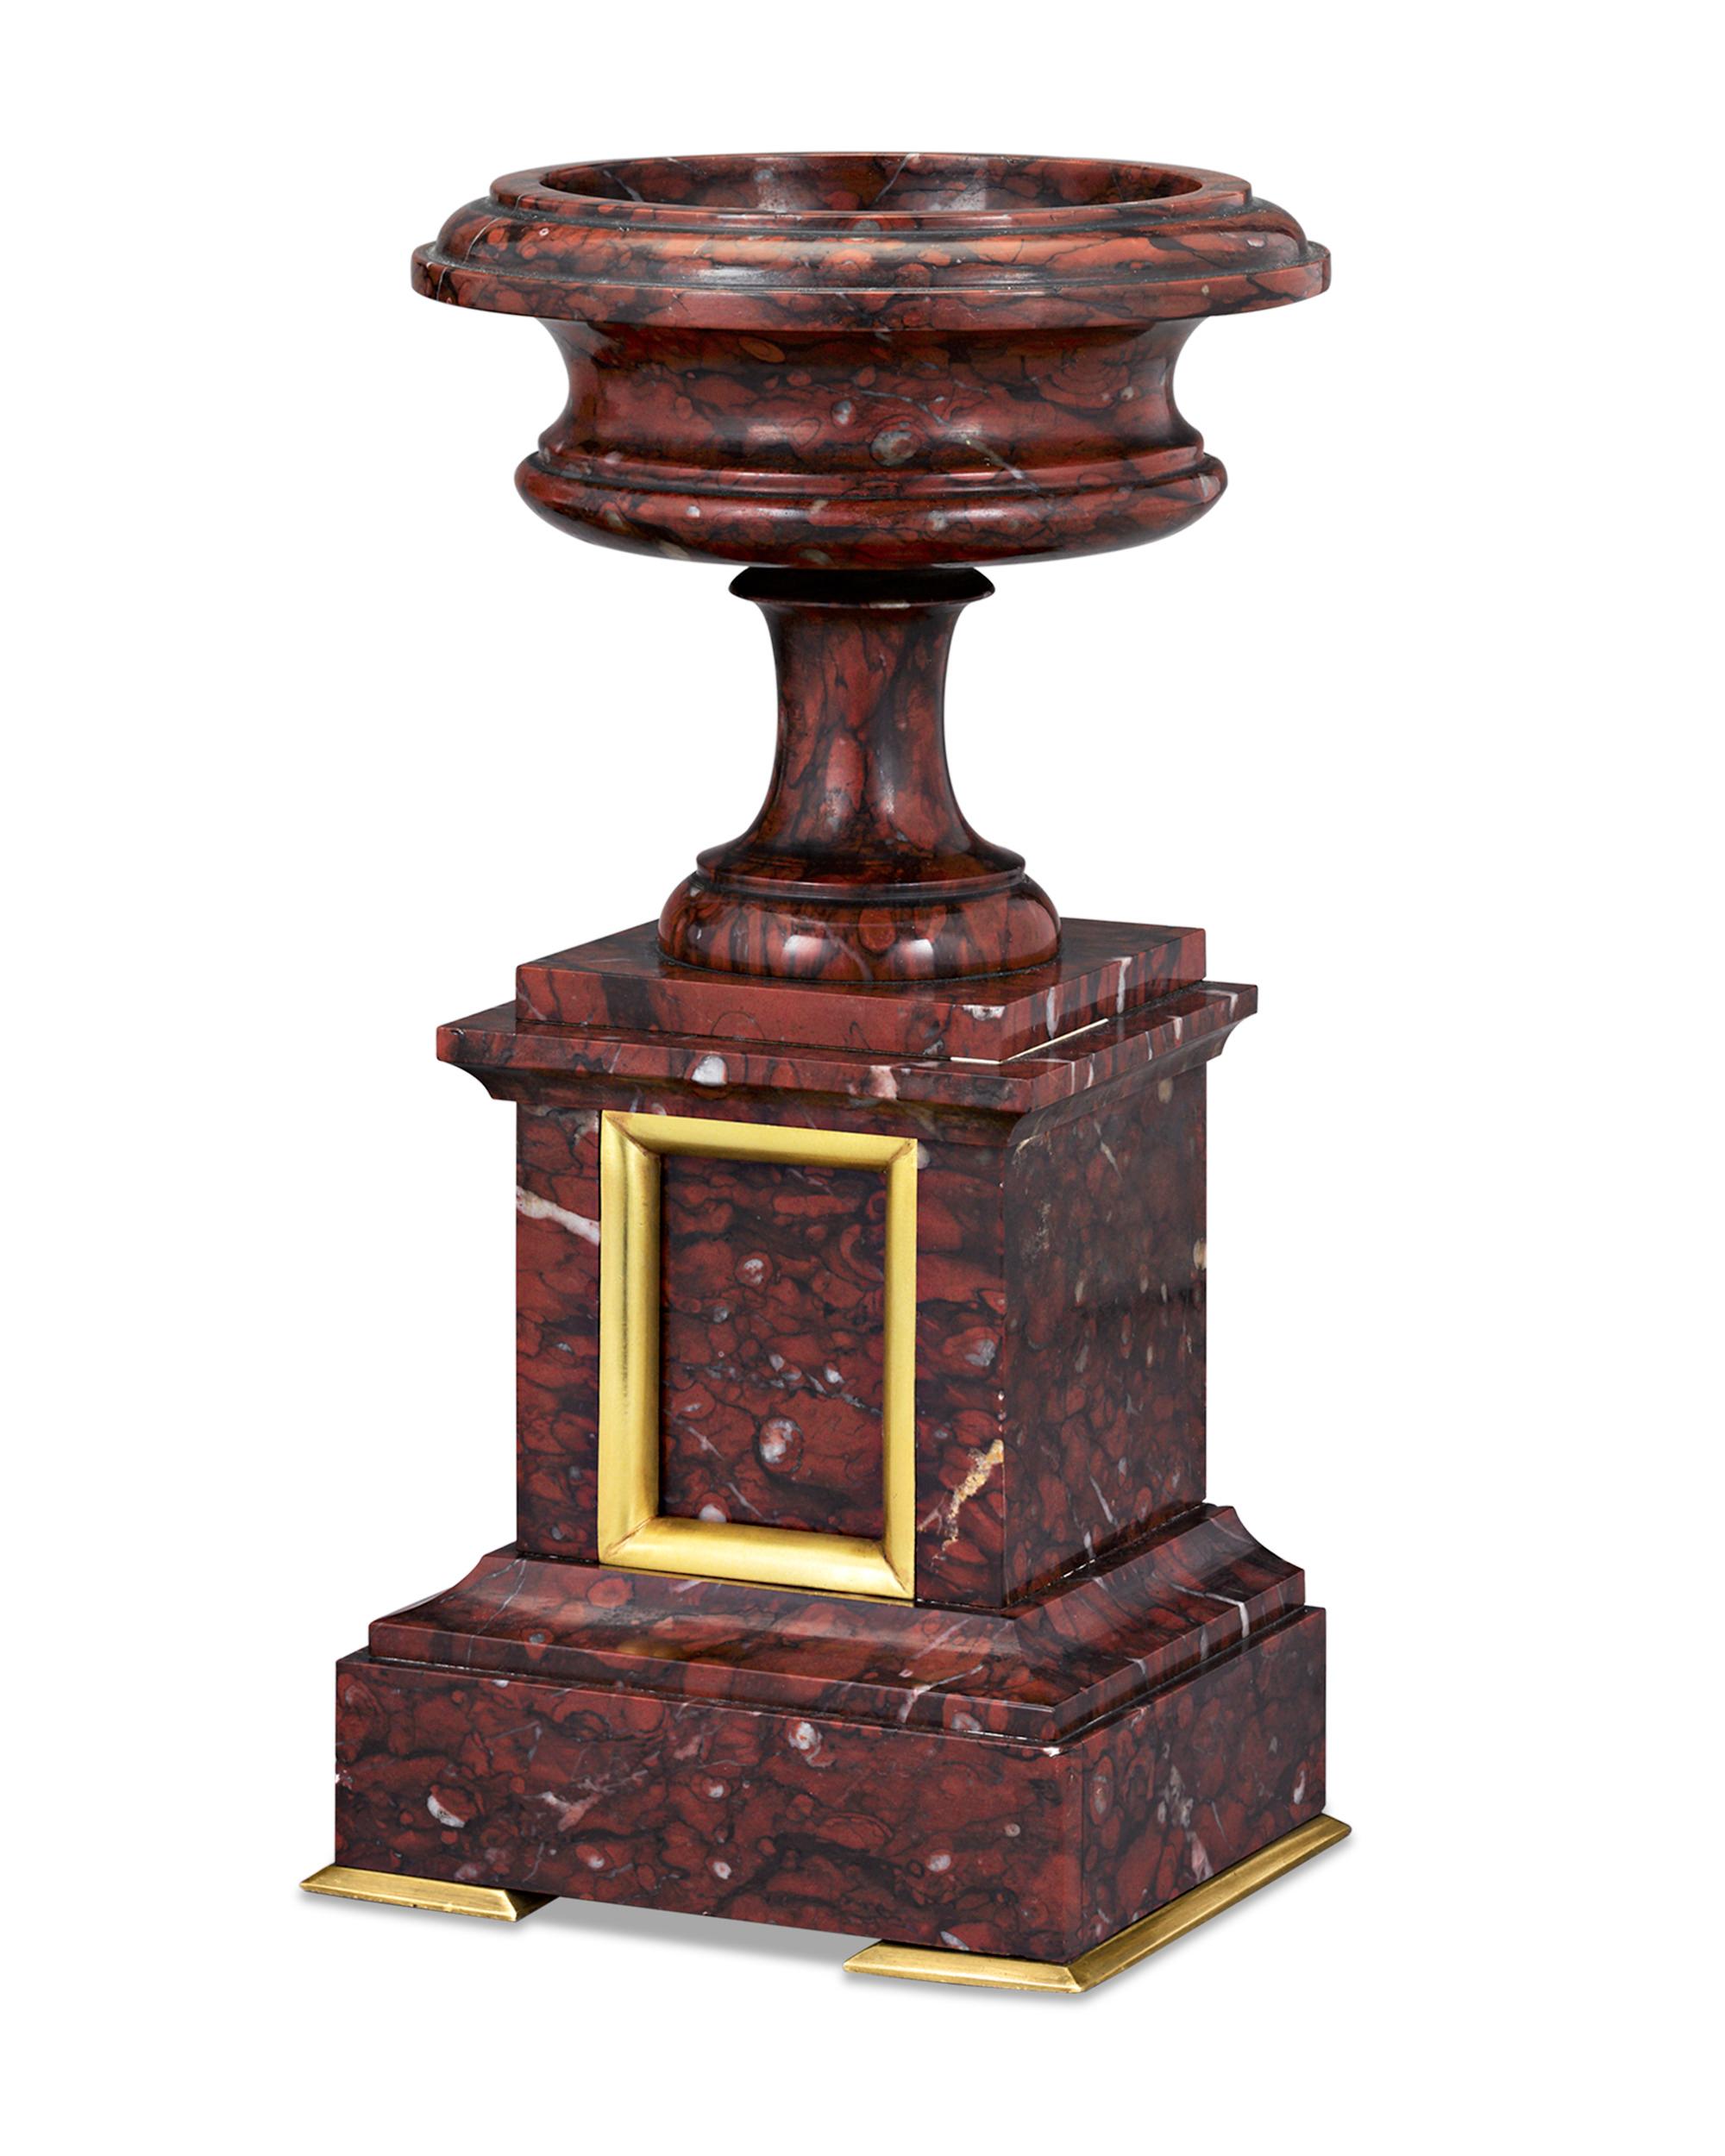 Elegant and stately is this pair of marble and doré bronze urns hewn from the finest French “Partridge eye” rouge griotte marble from the Languedoc region. Named for the griotte cherry for its deep, rich color, red griotte was the favorite marble